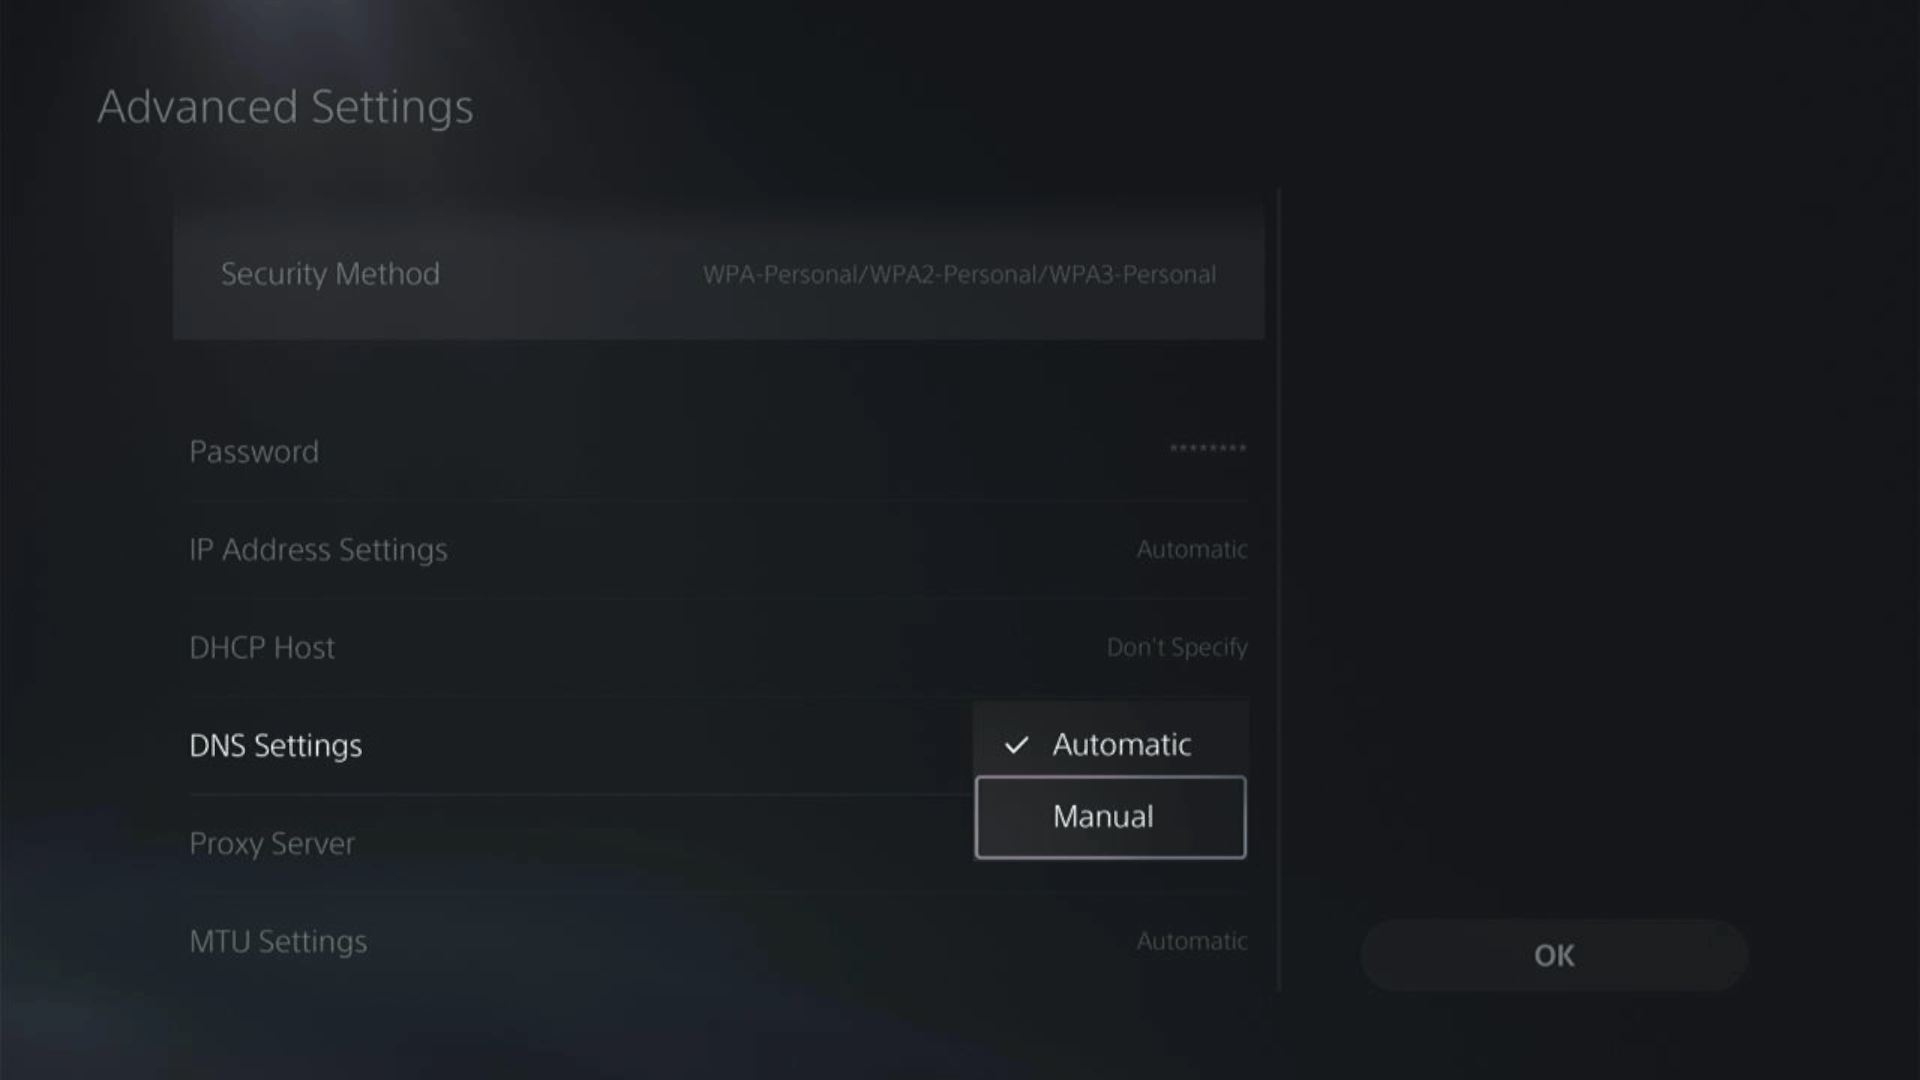 dns settings of a network on ps5 to change it to manual from automatic